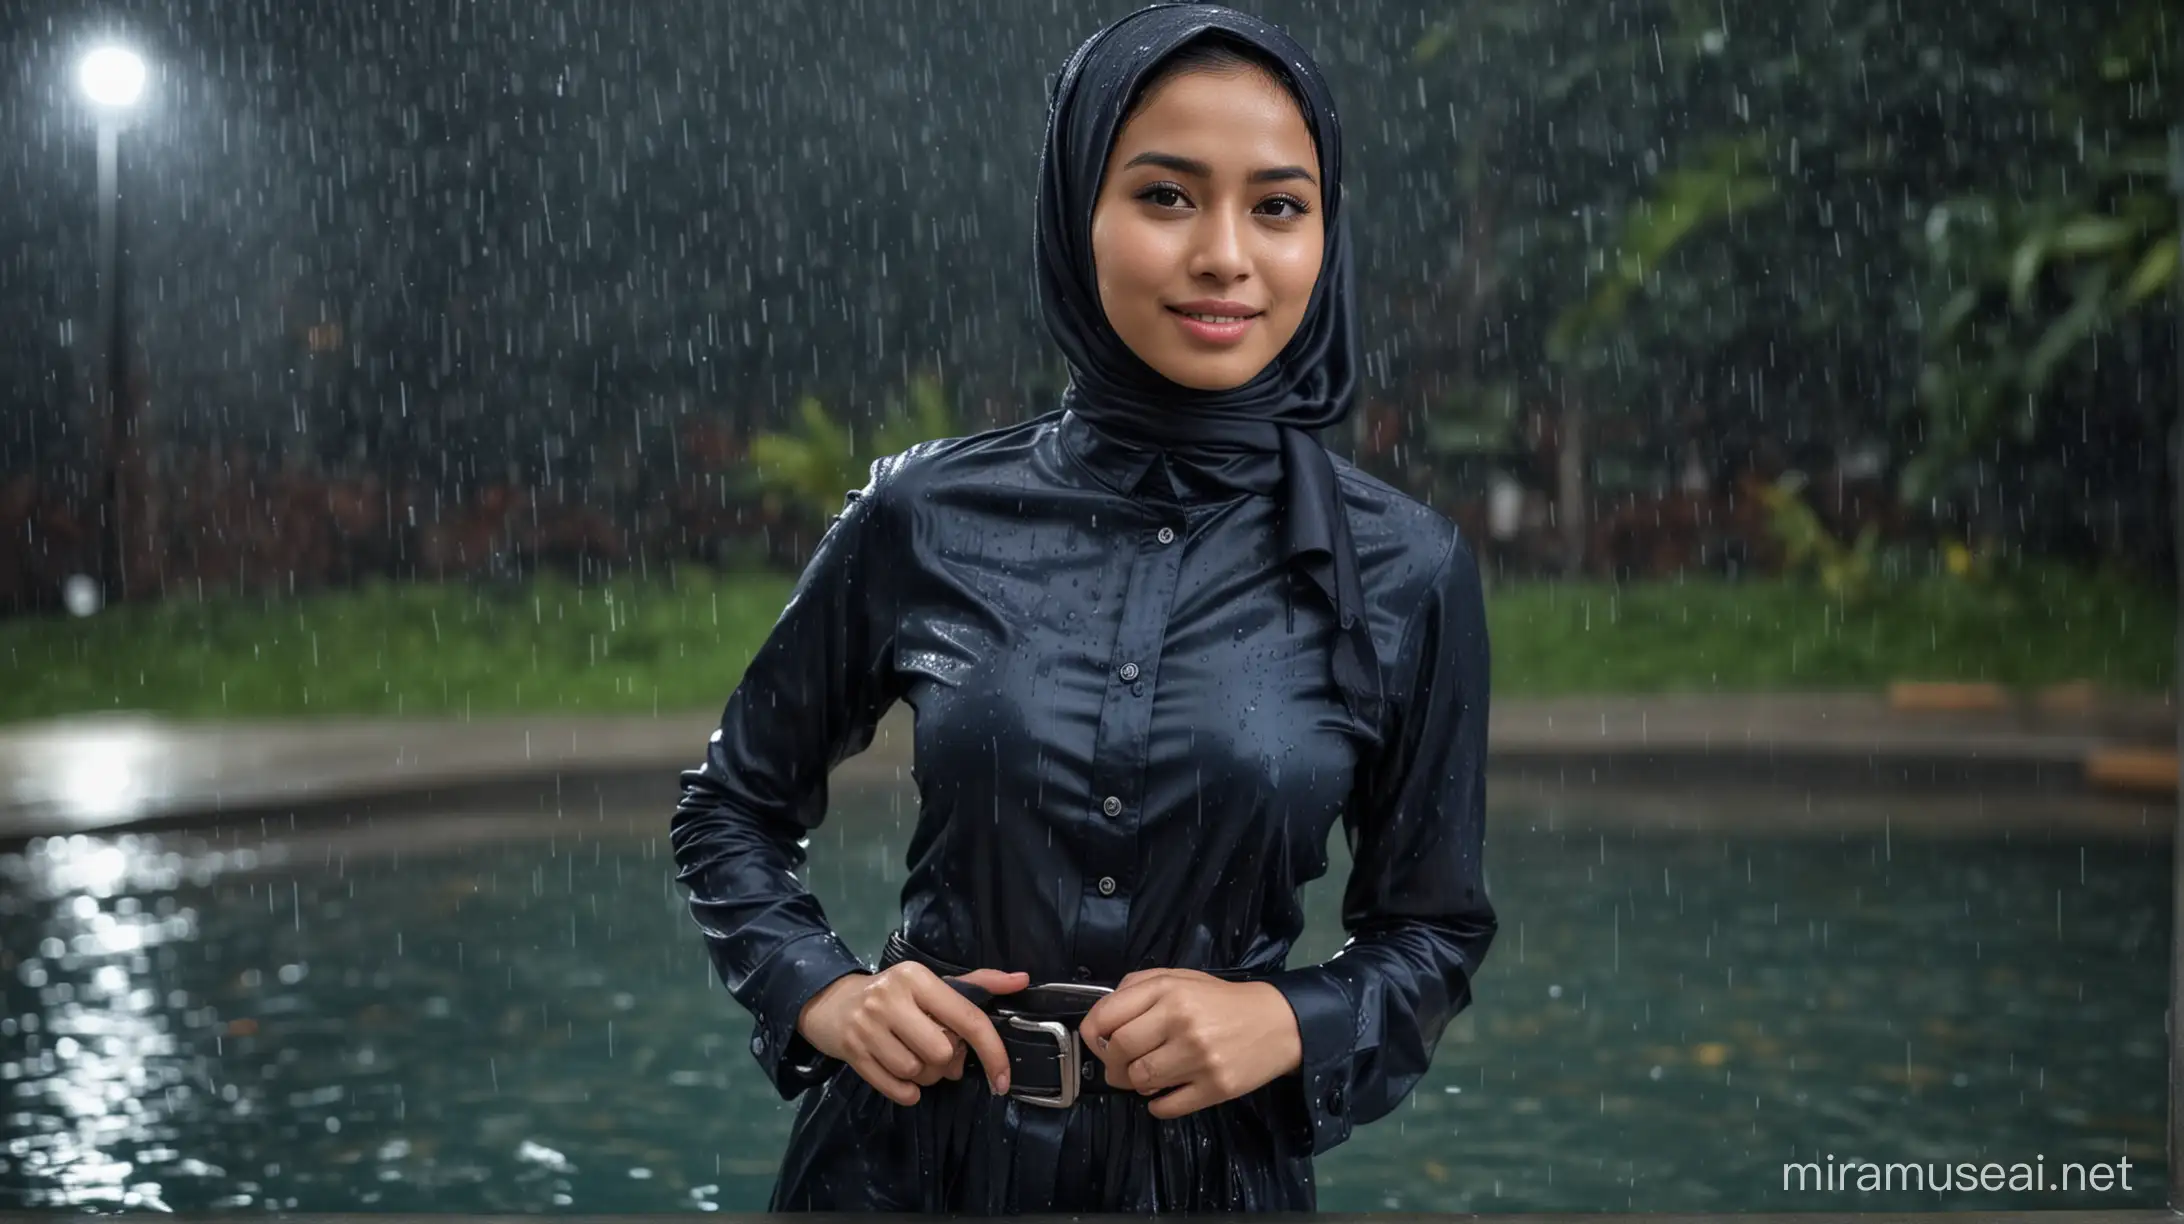 Indonesian Woman Swimming Fully Clothed in Heavy Rain at Poolside